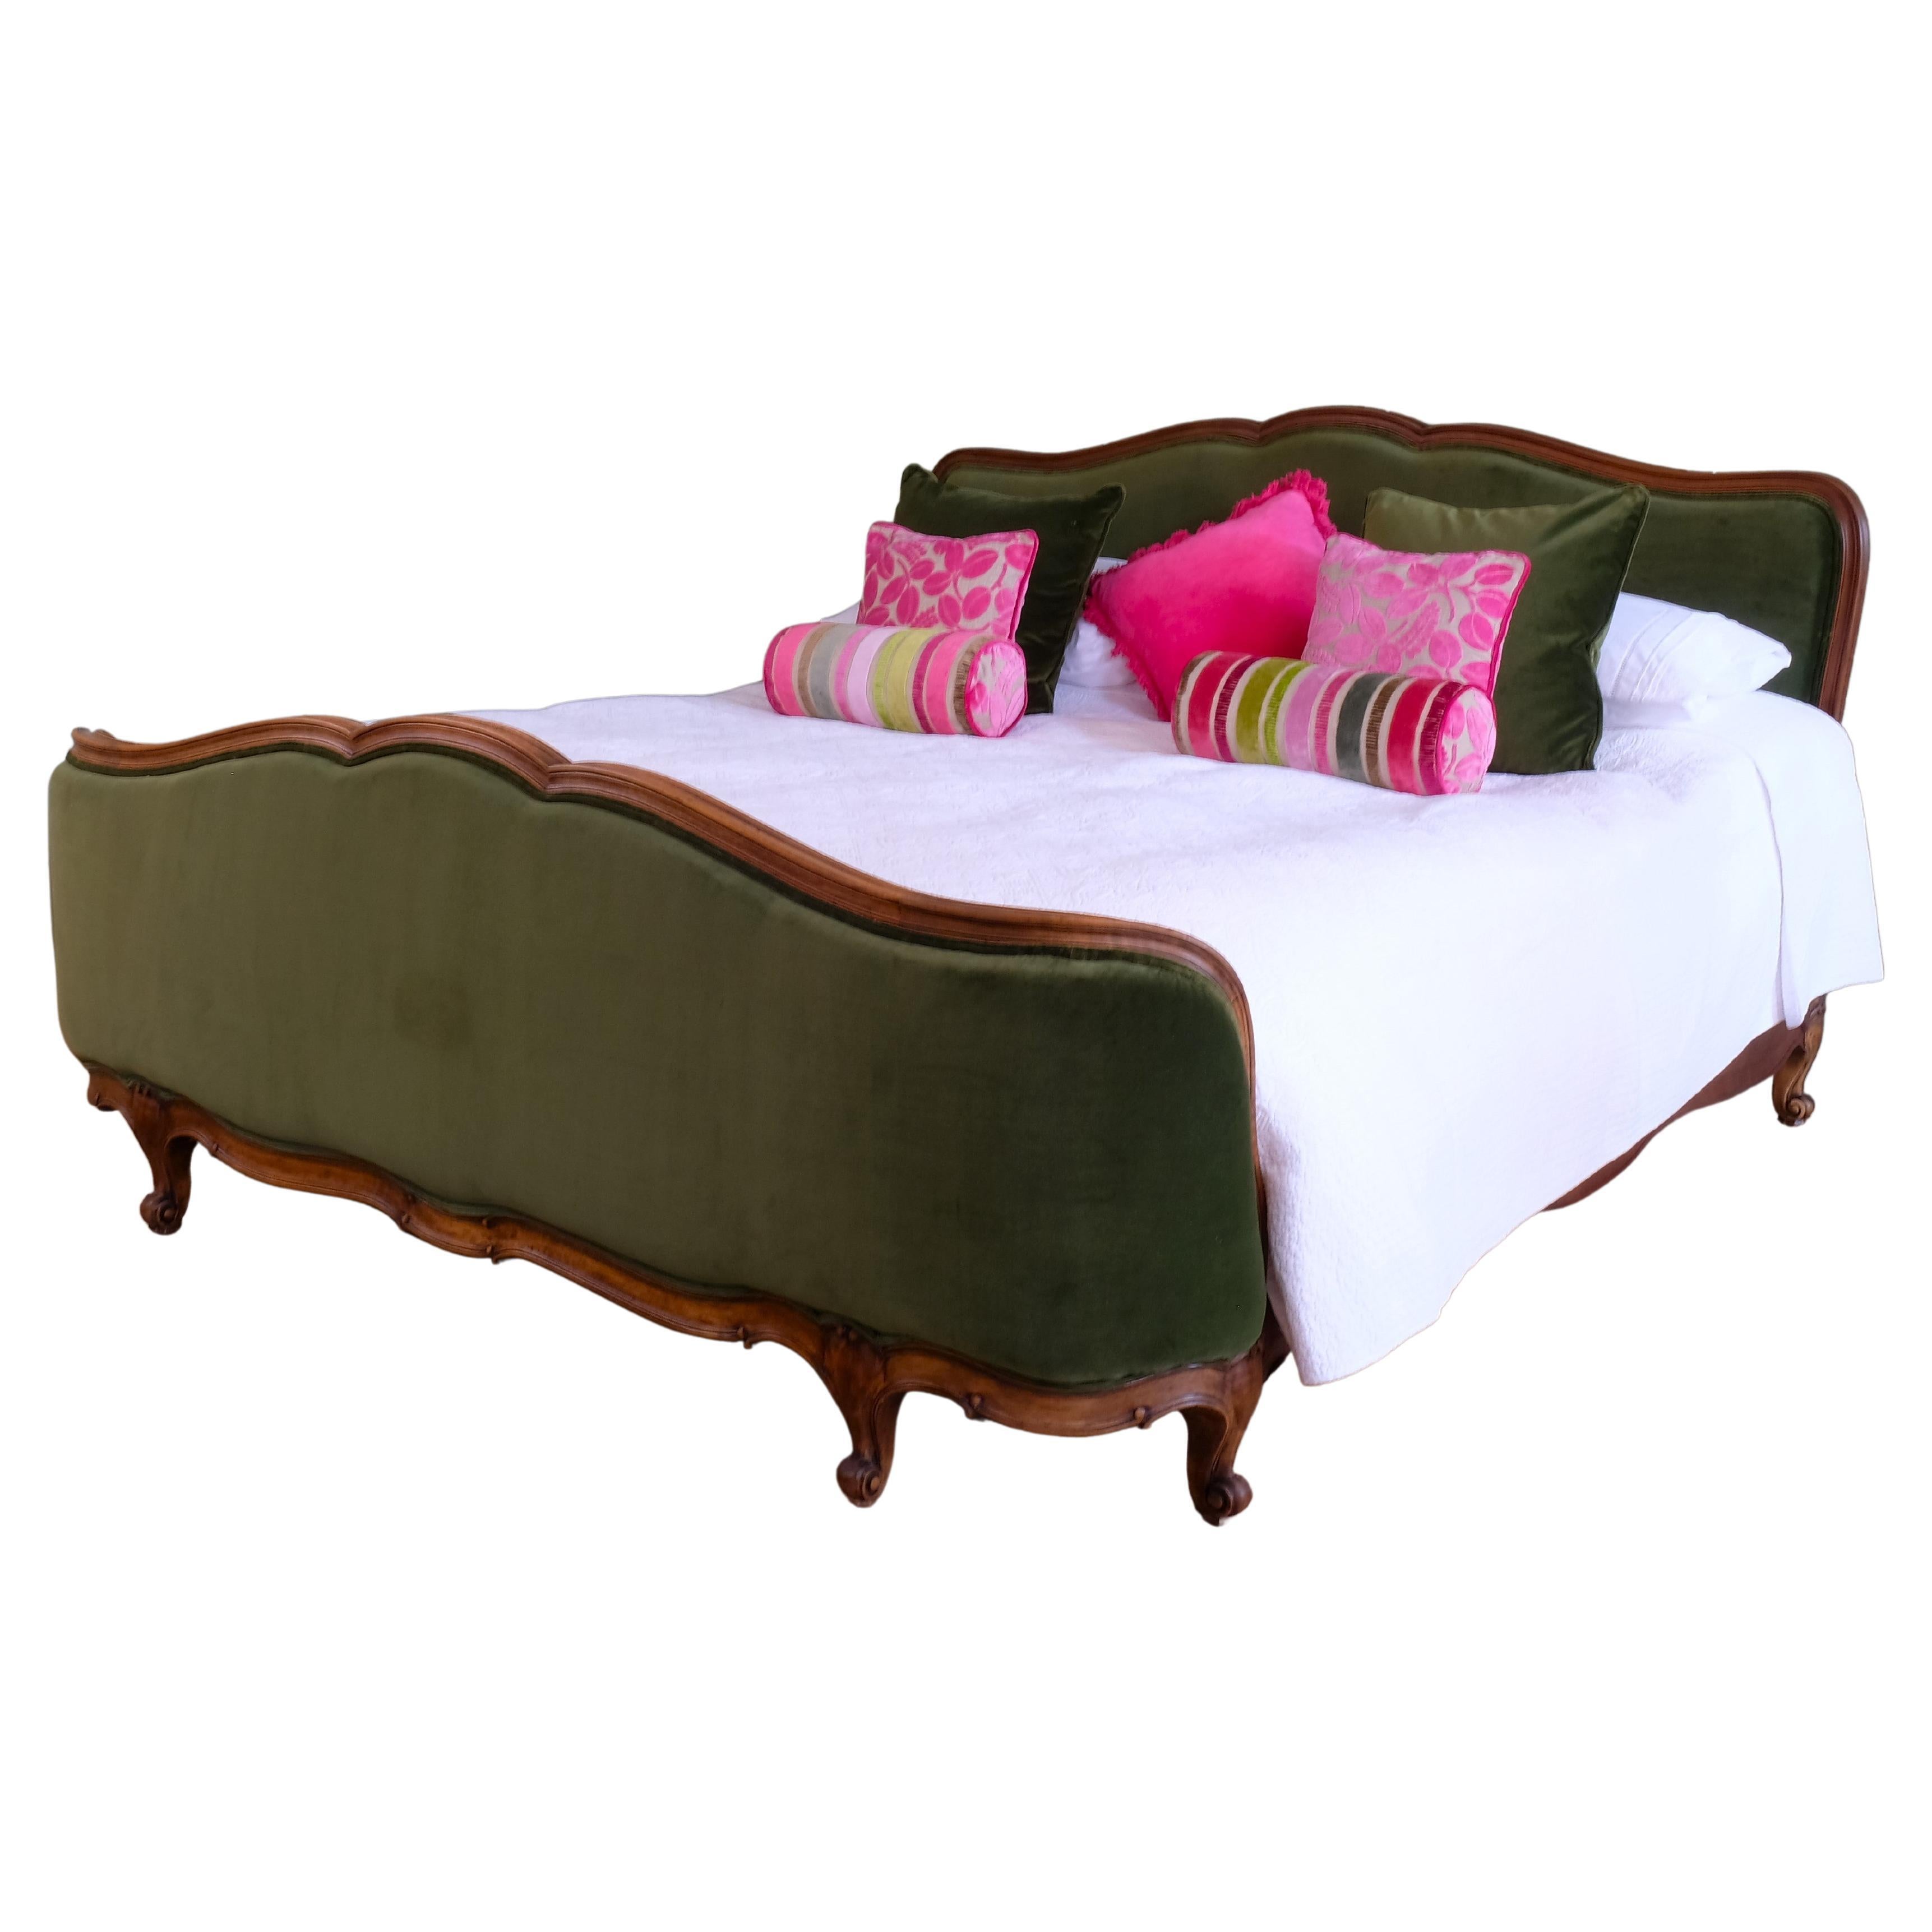 Superking 6' Antique French Upholstered Bed For Sale